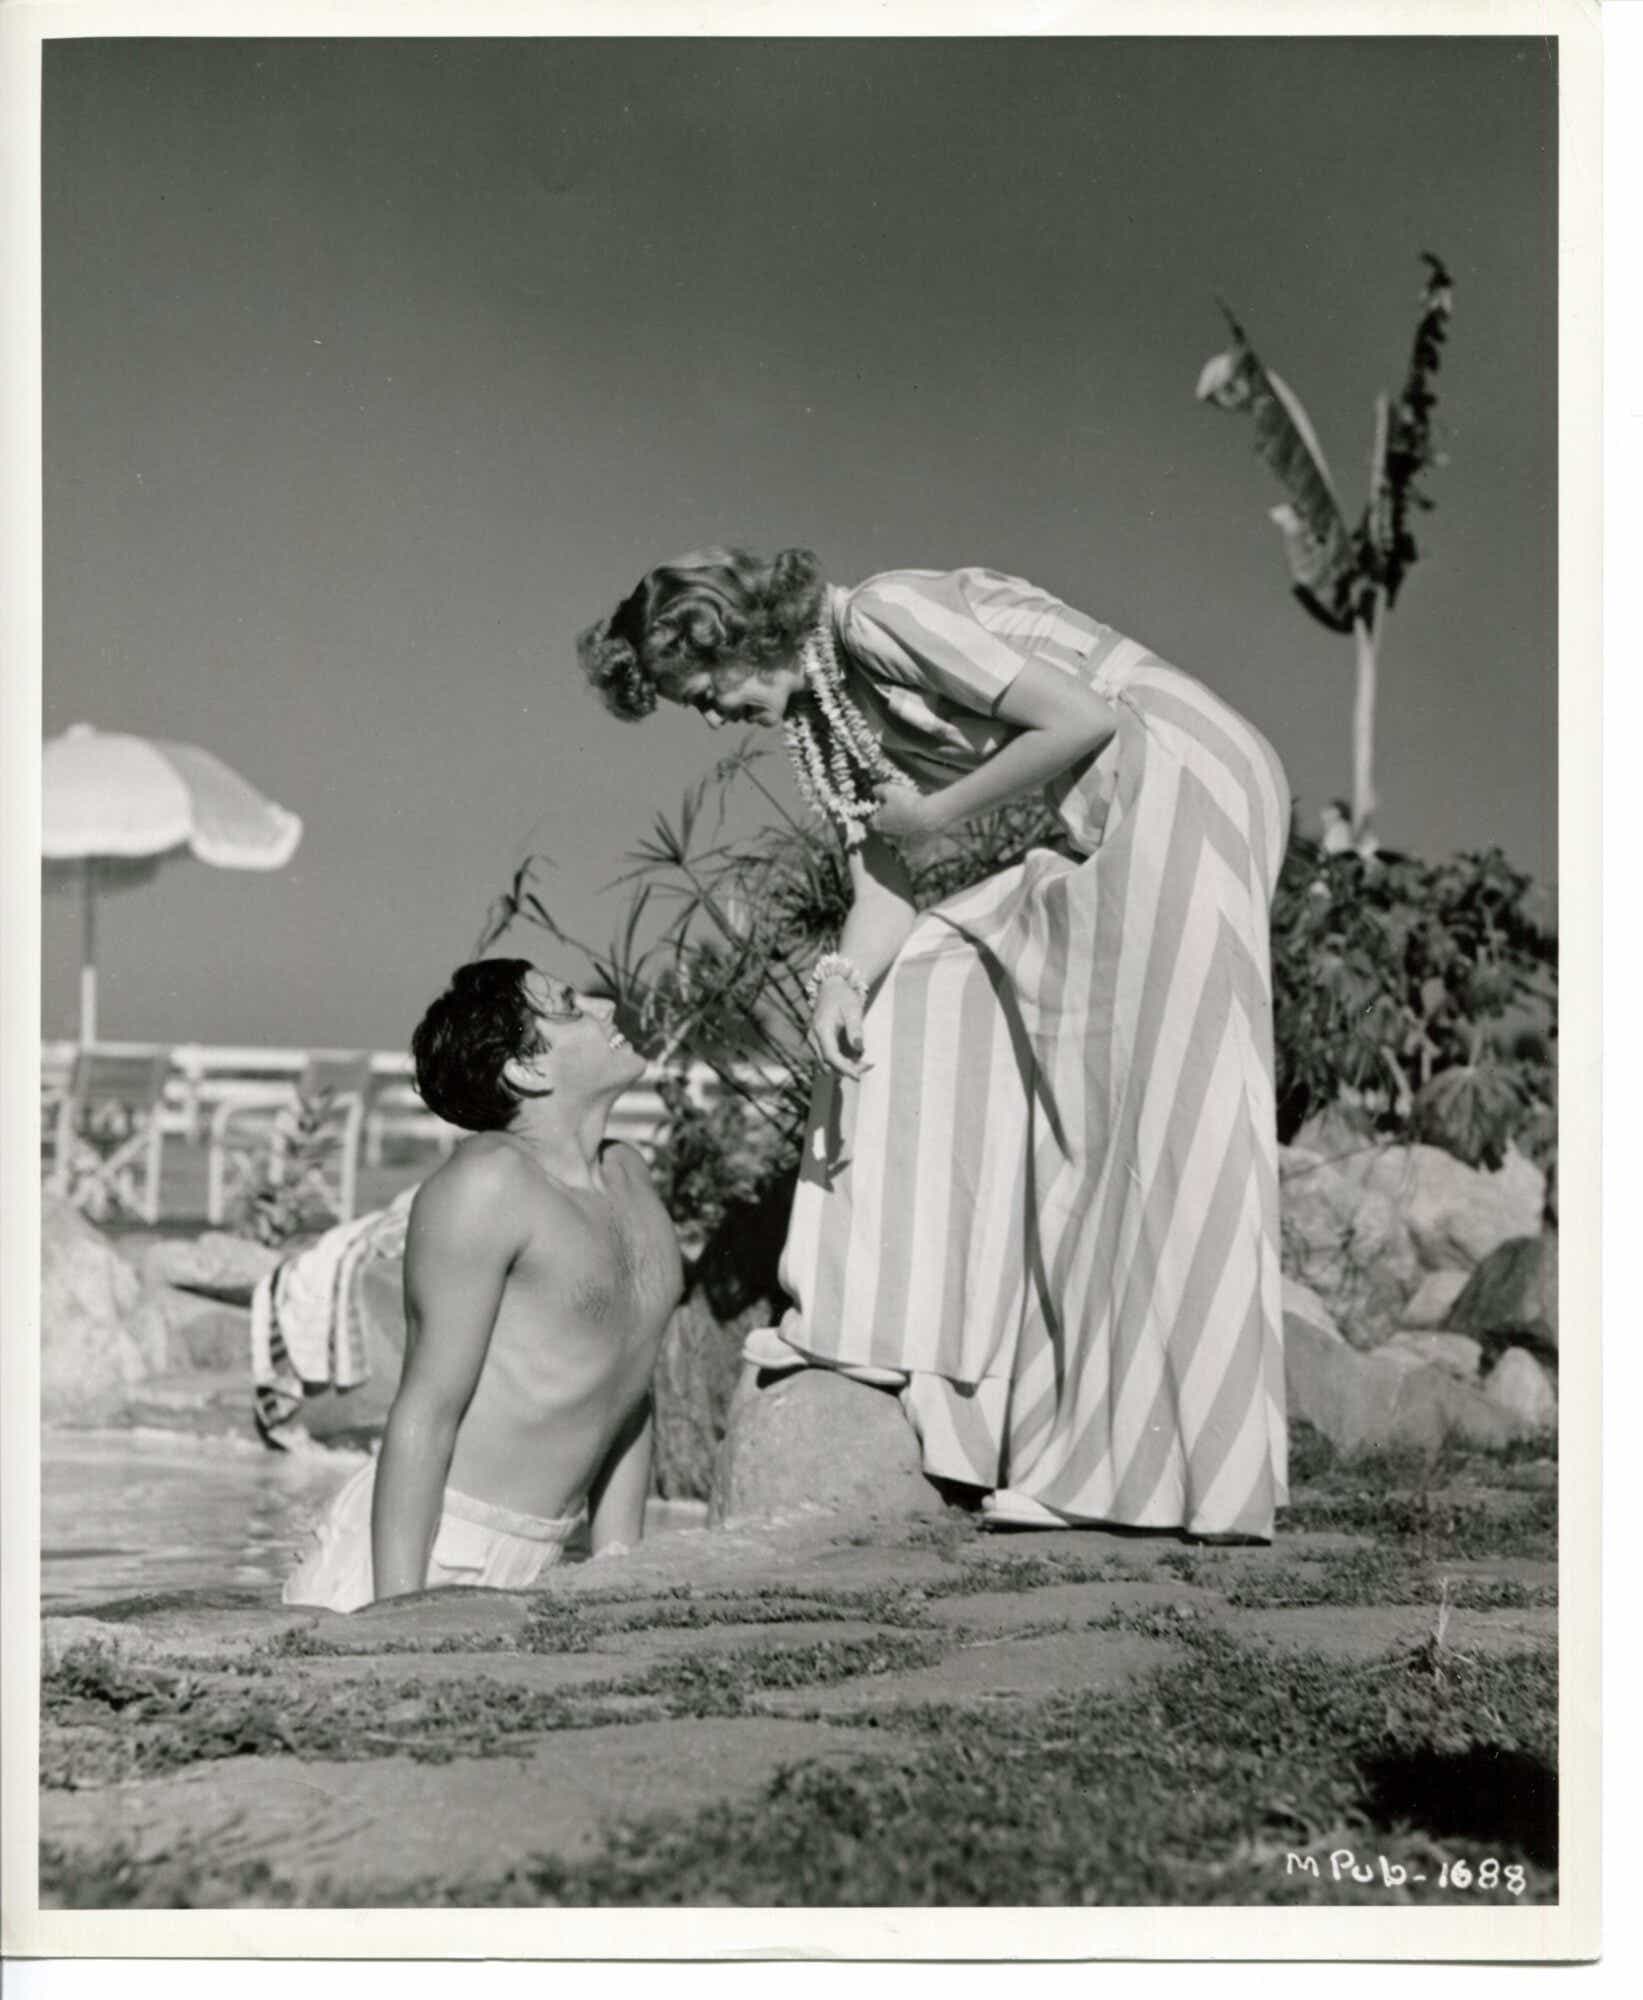 Lucille Ball and Desi Arnaz at home by their pool